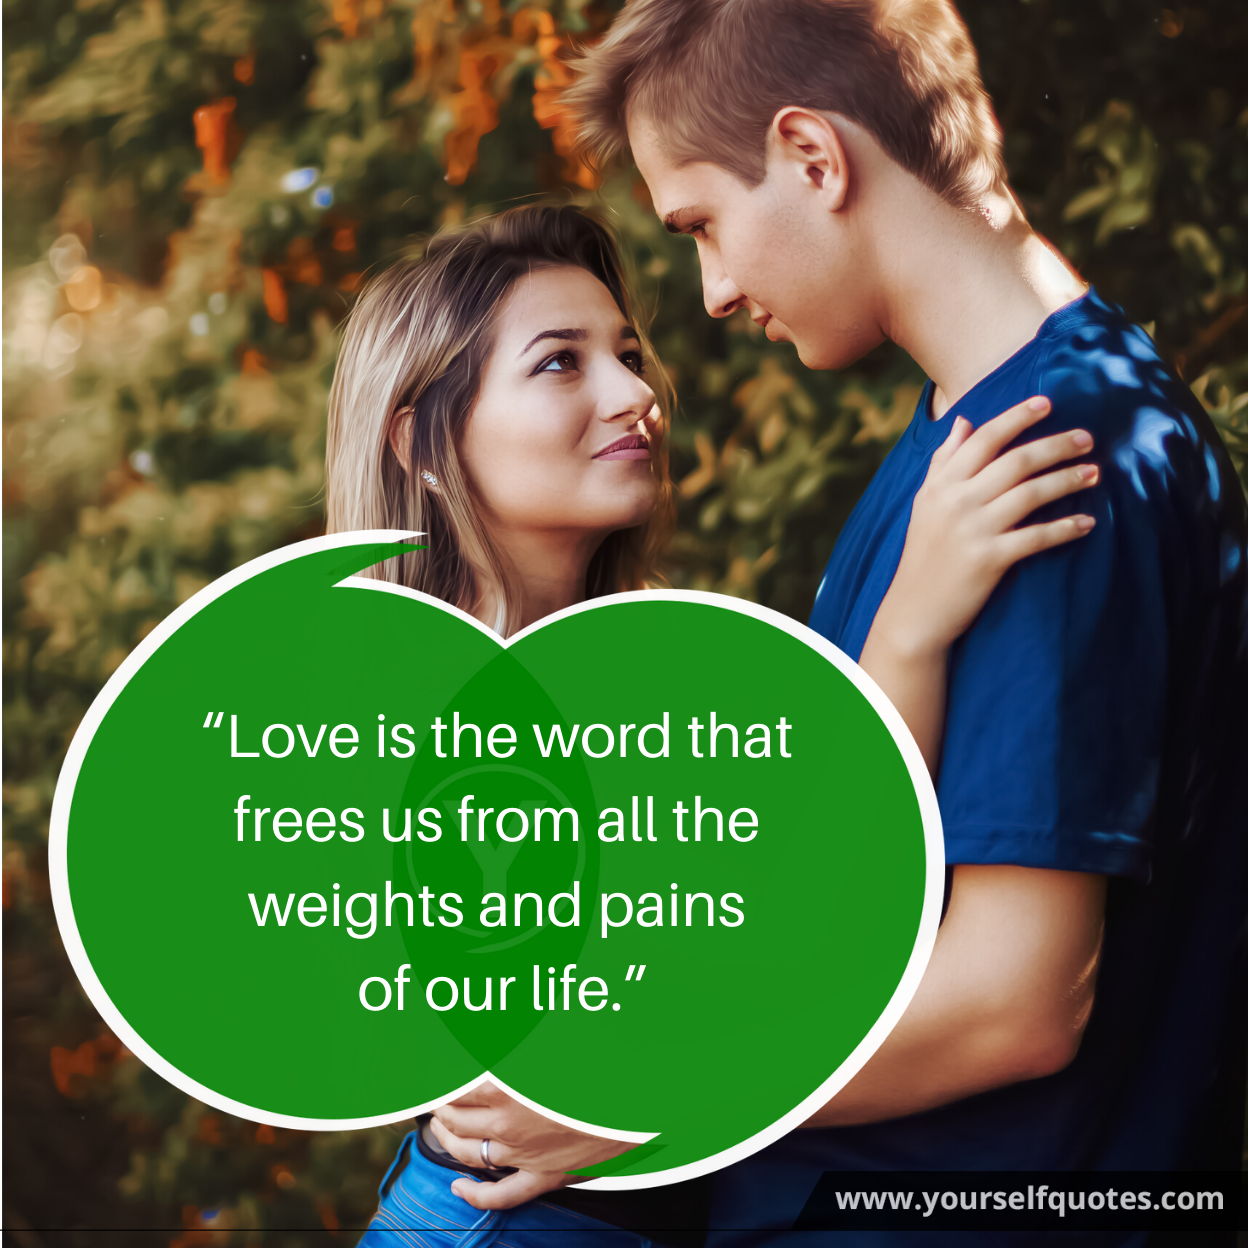 Quotes on Love Life